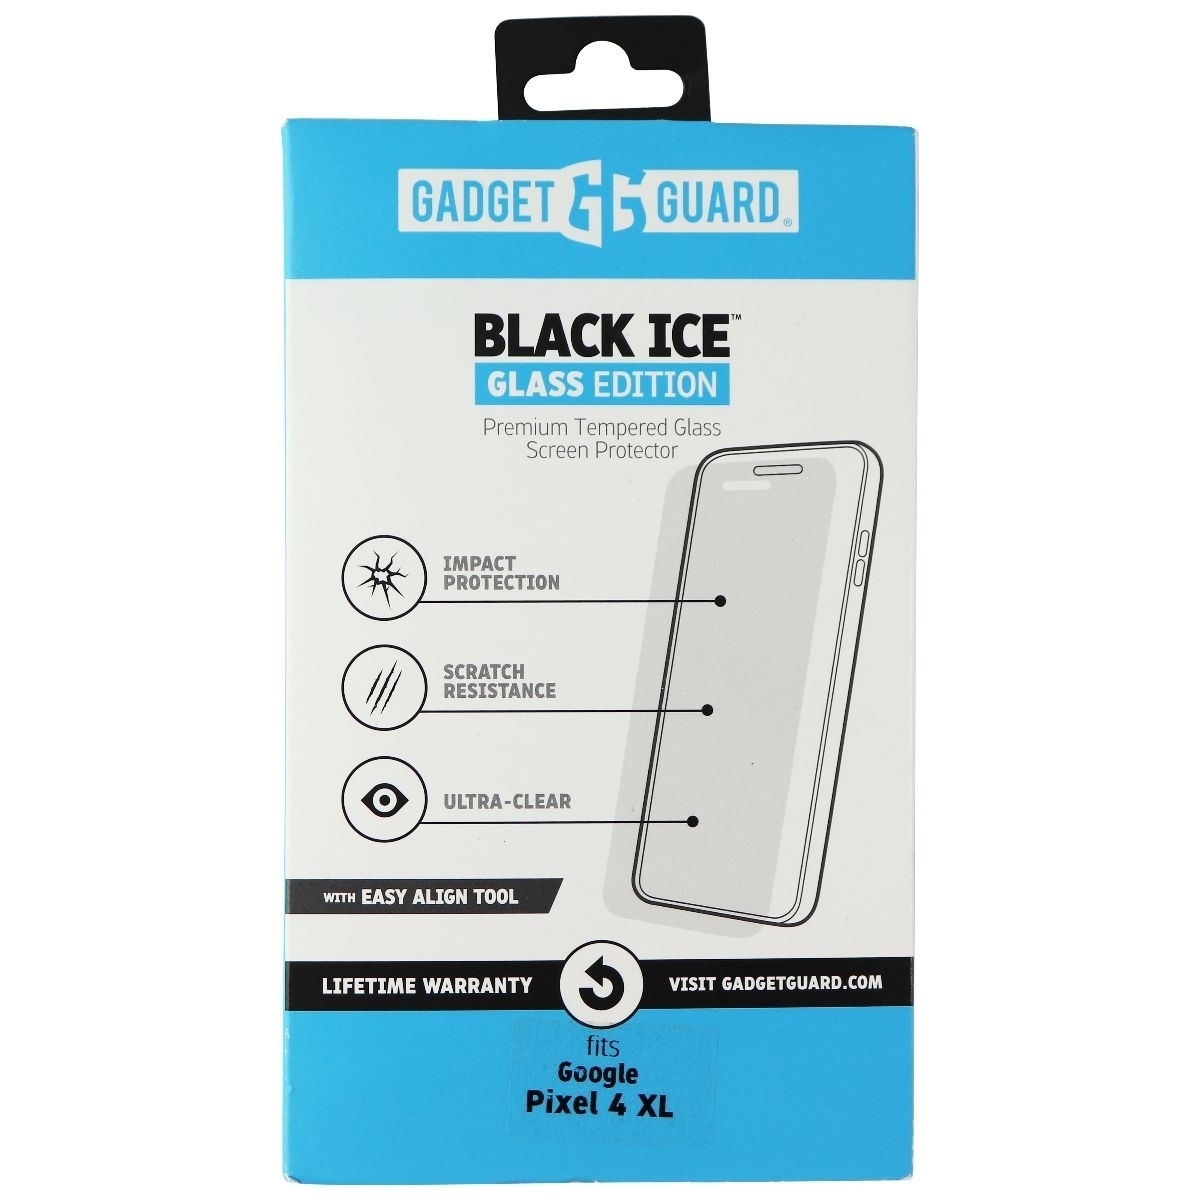 Gadget Guard Black Ice Glass Edition Screen Protector For Google Pixel 4 XL